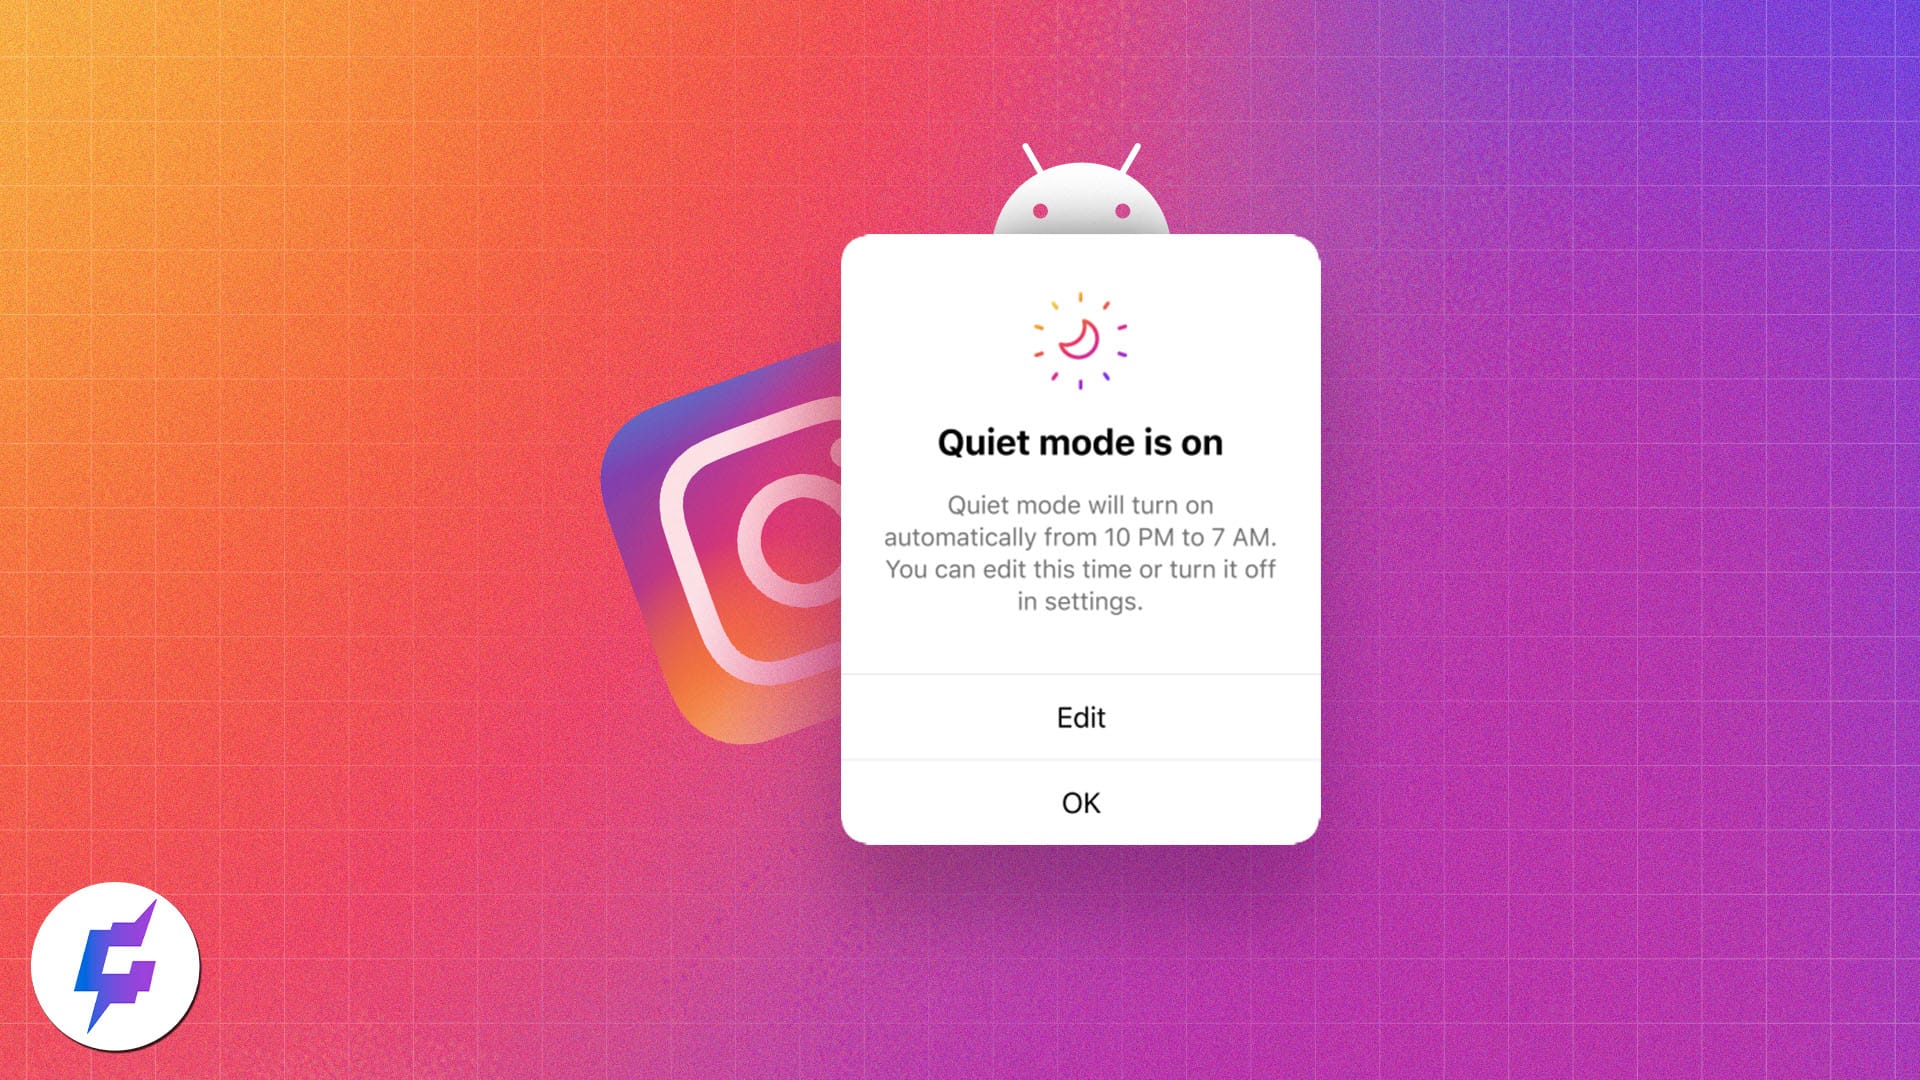 How to turn Quiet mode on or off in Instagram on Android